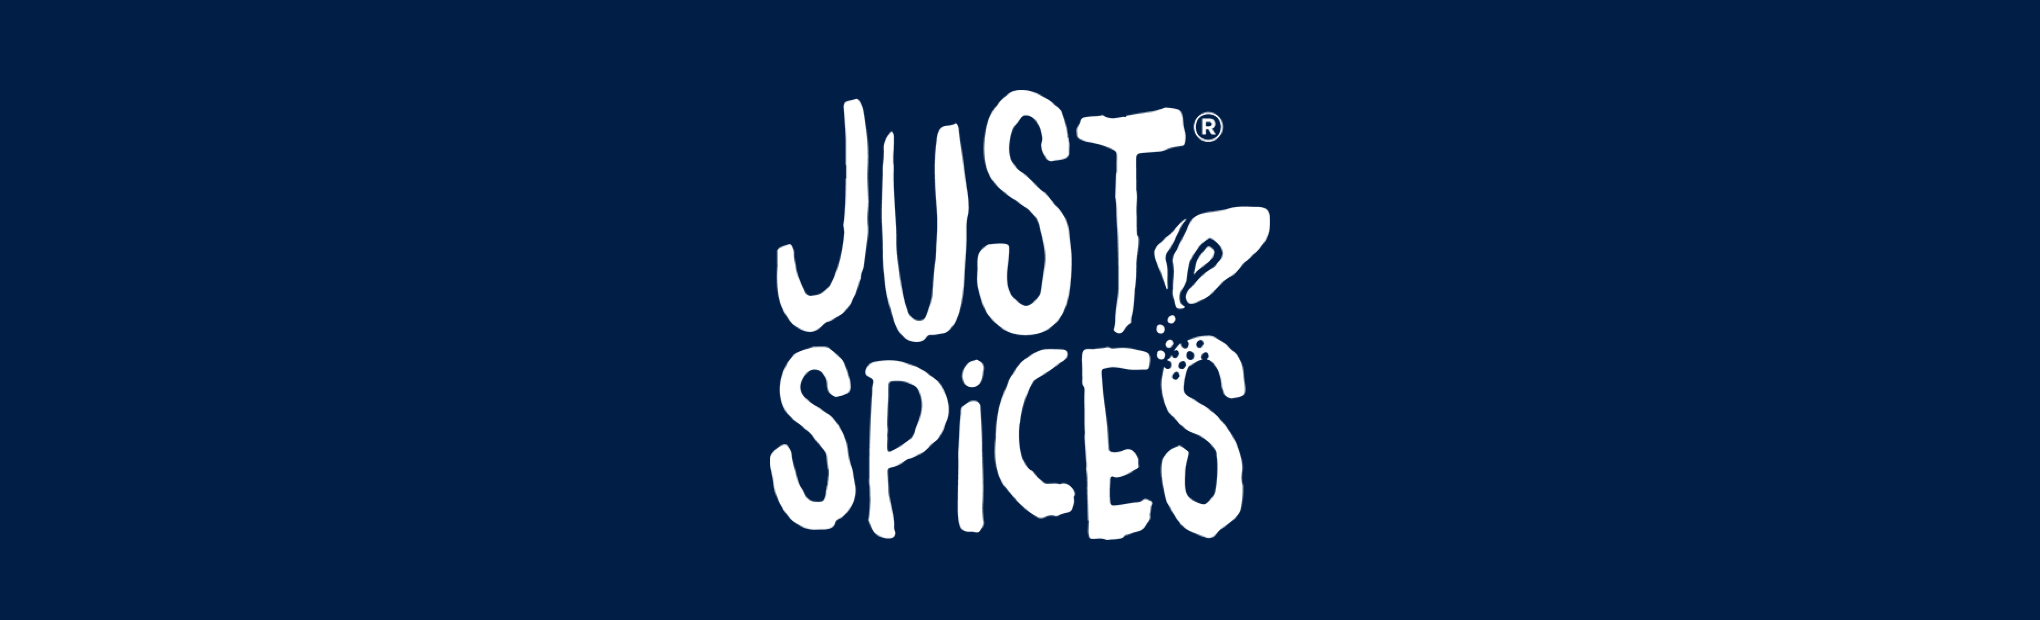 justSpices